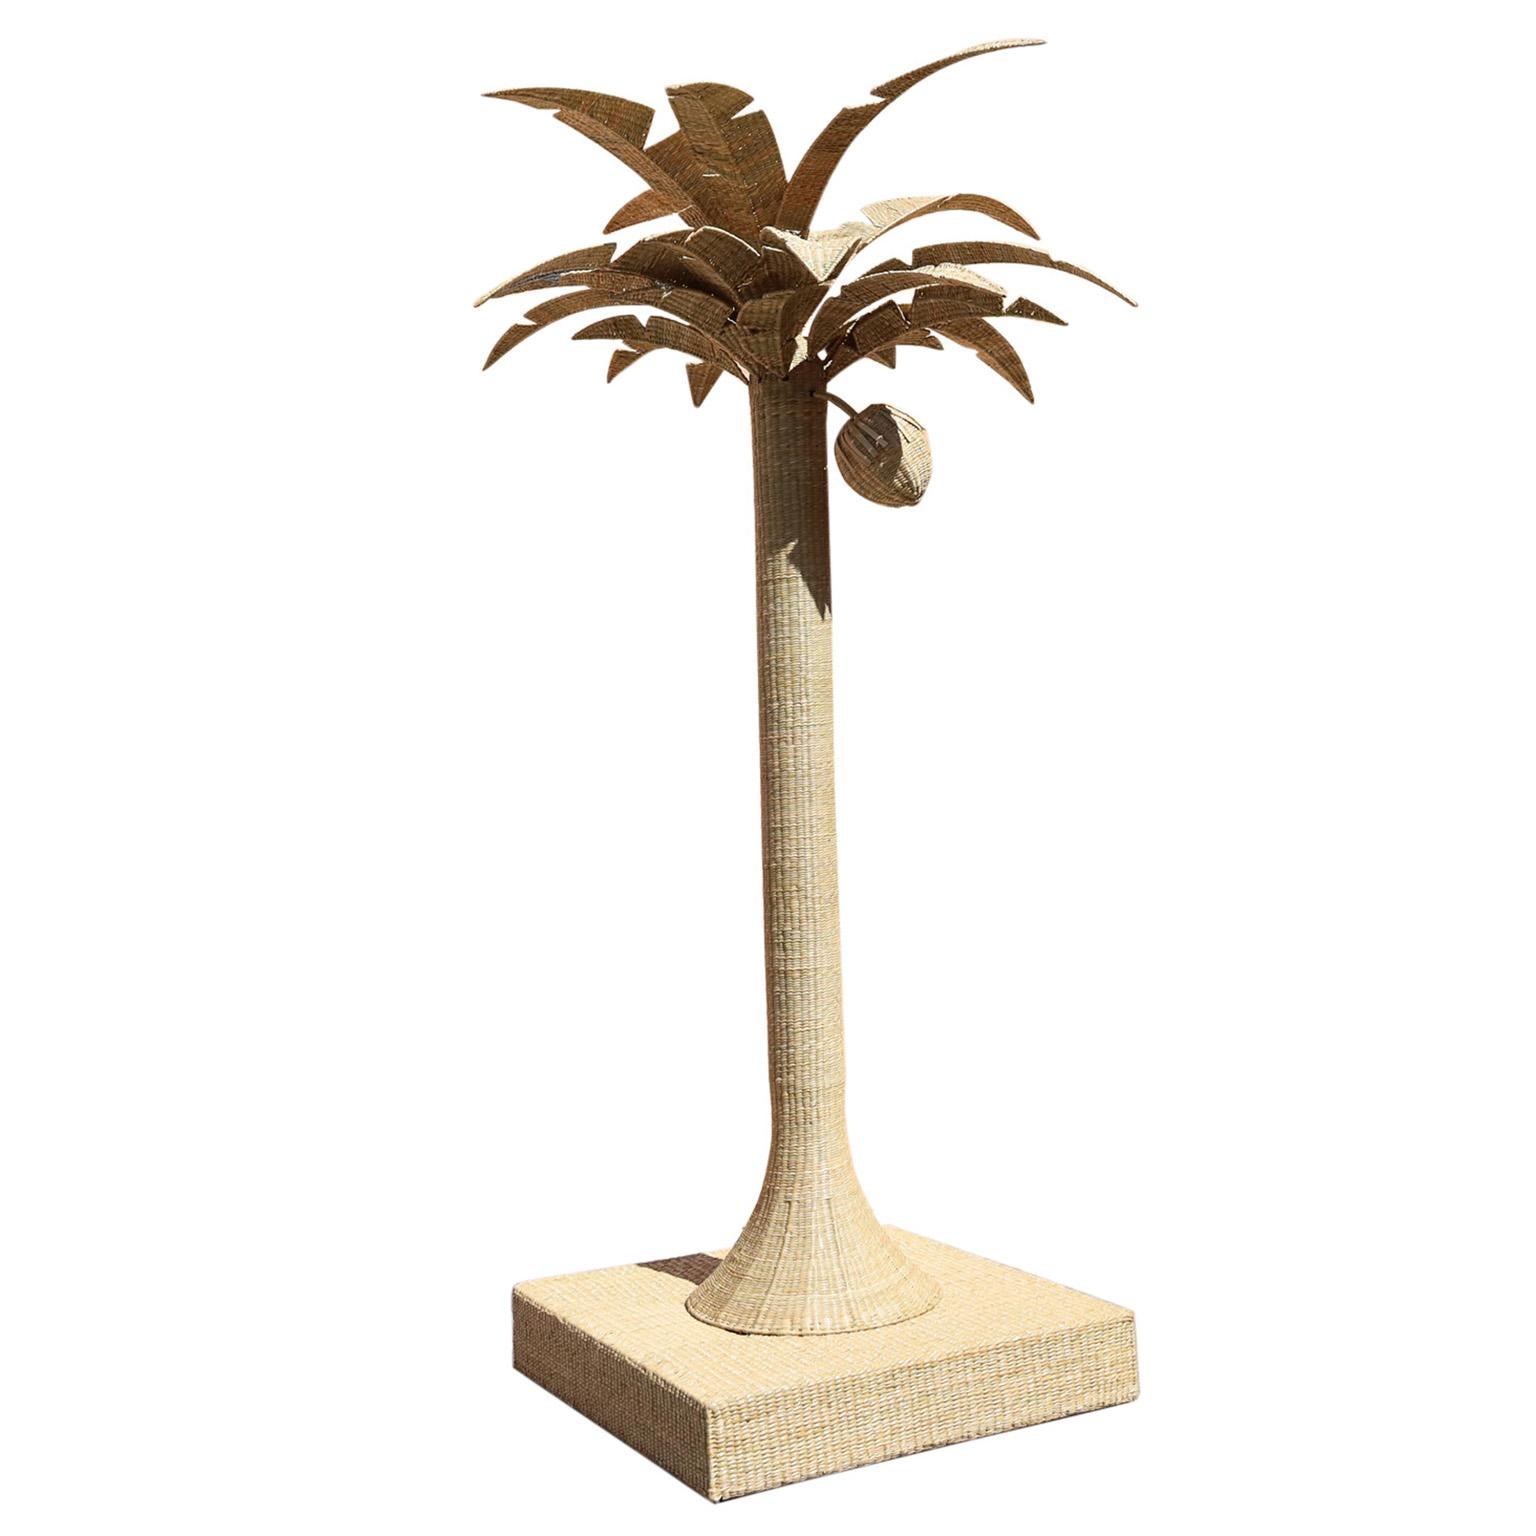 Life size sculpture of a palm tree with a coconut crafted in wicker or reed wrapped over a metal frame with impressive stylized presence. From the FS Flores Collection designed and offered exclusively by F.S. Henemader Antiques.